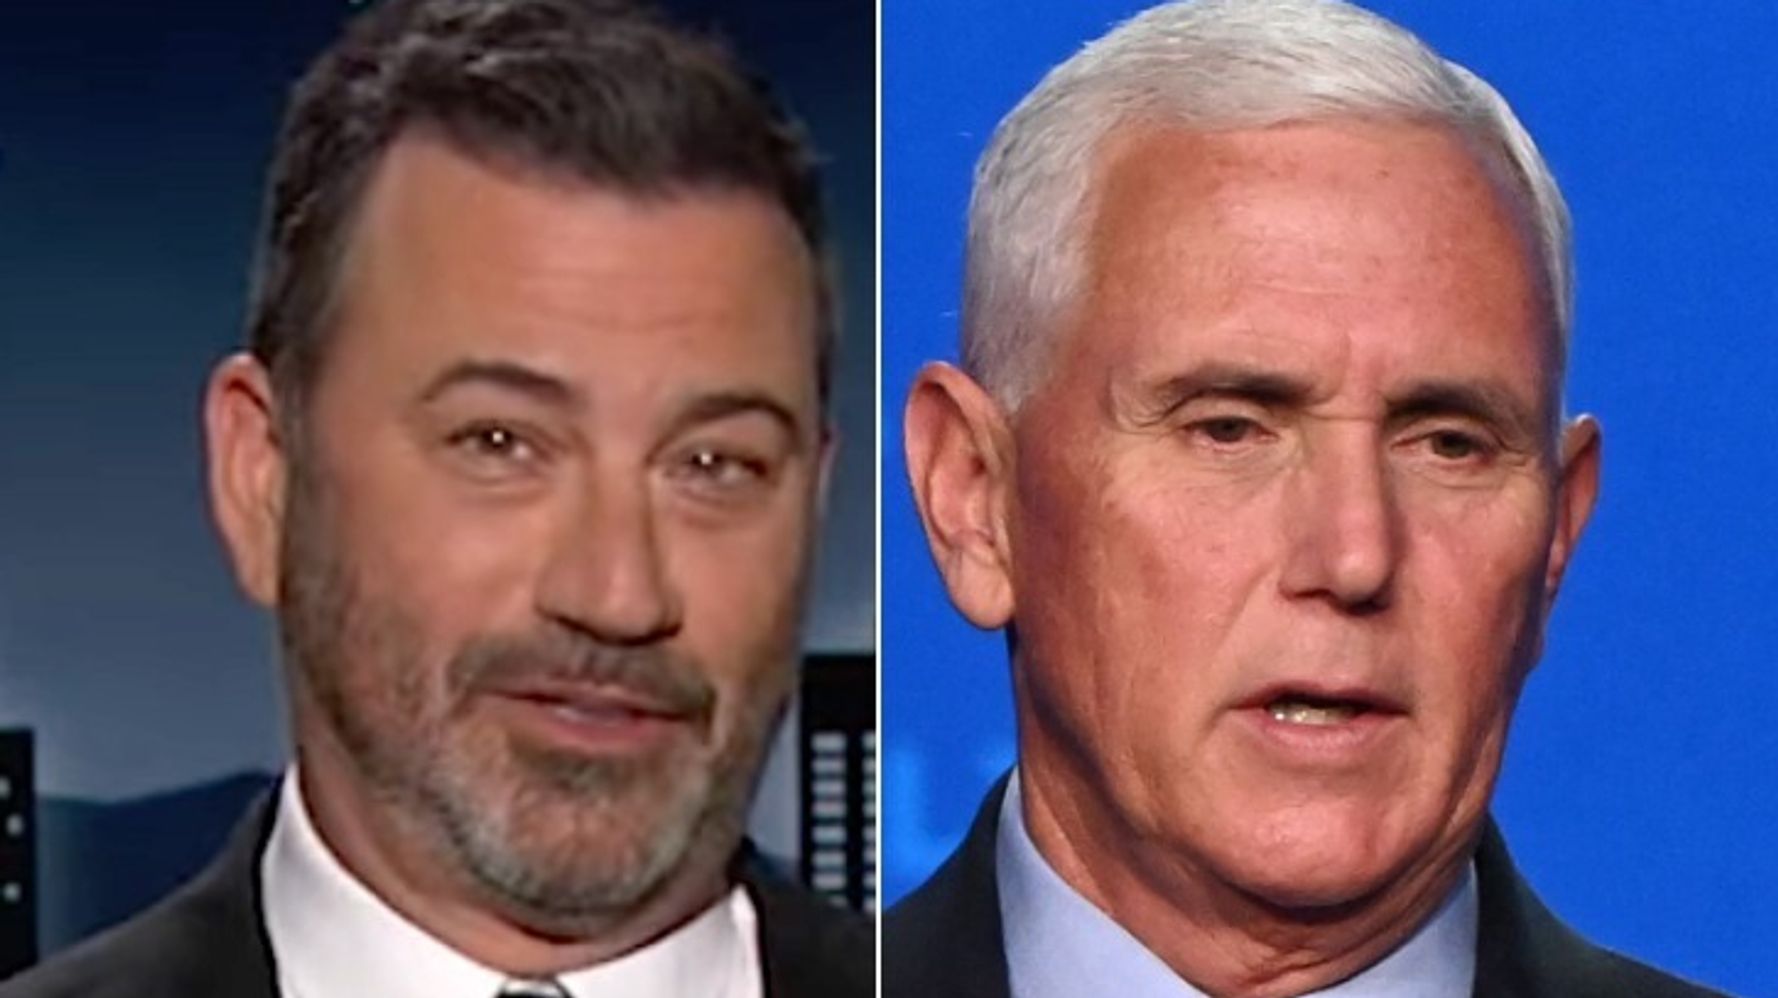 Jimmy Kimmel Rips Mike Pence After New Audio: ‘I Guess Trump Was Right’ About Him